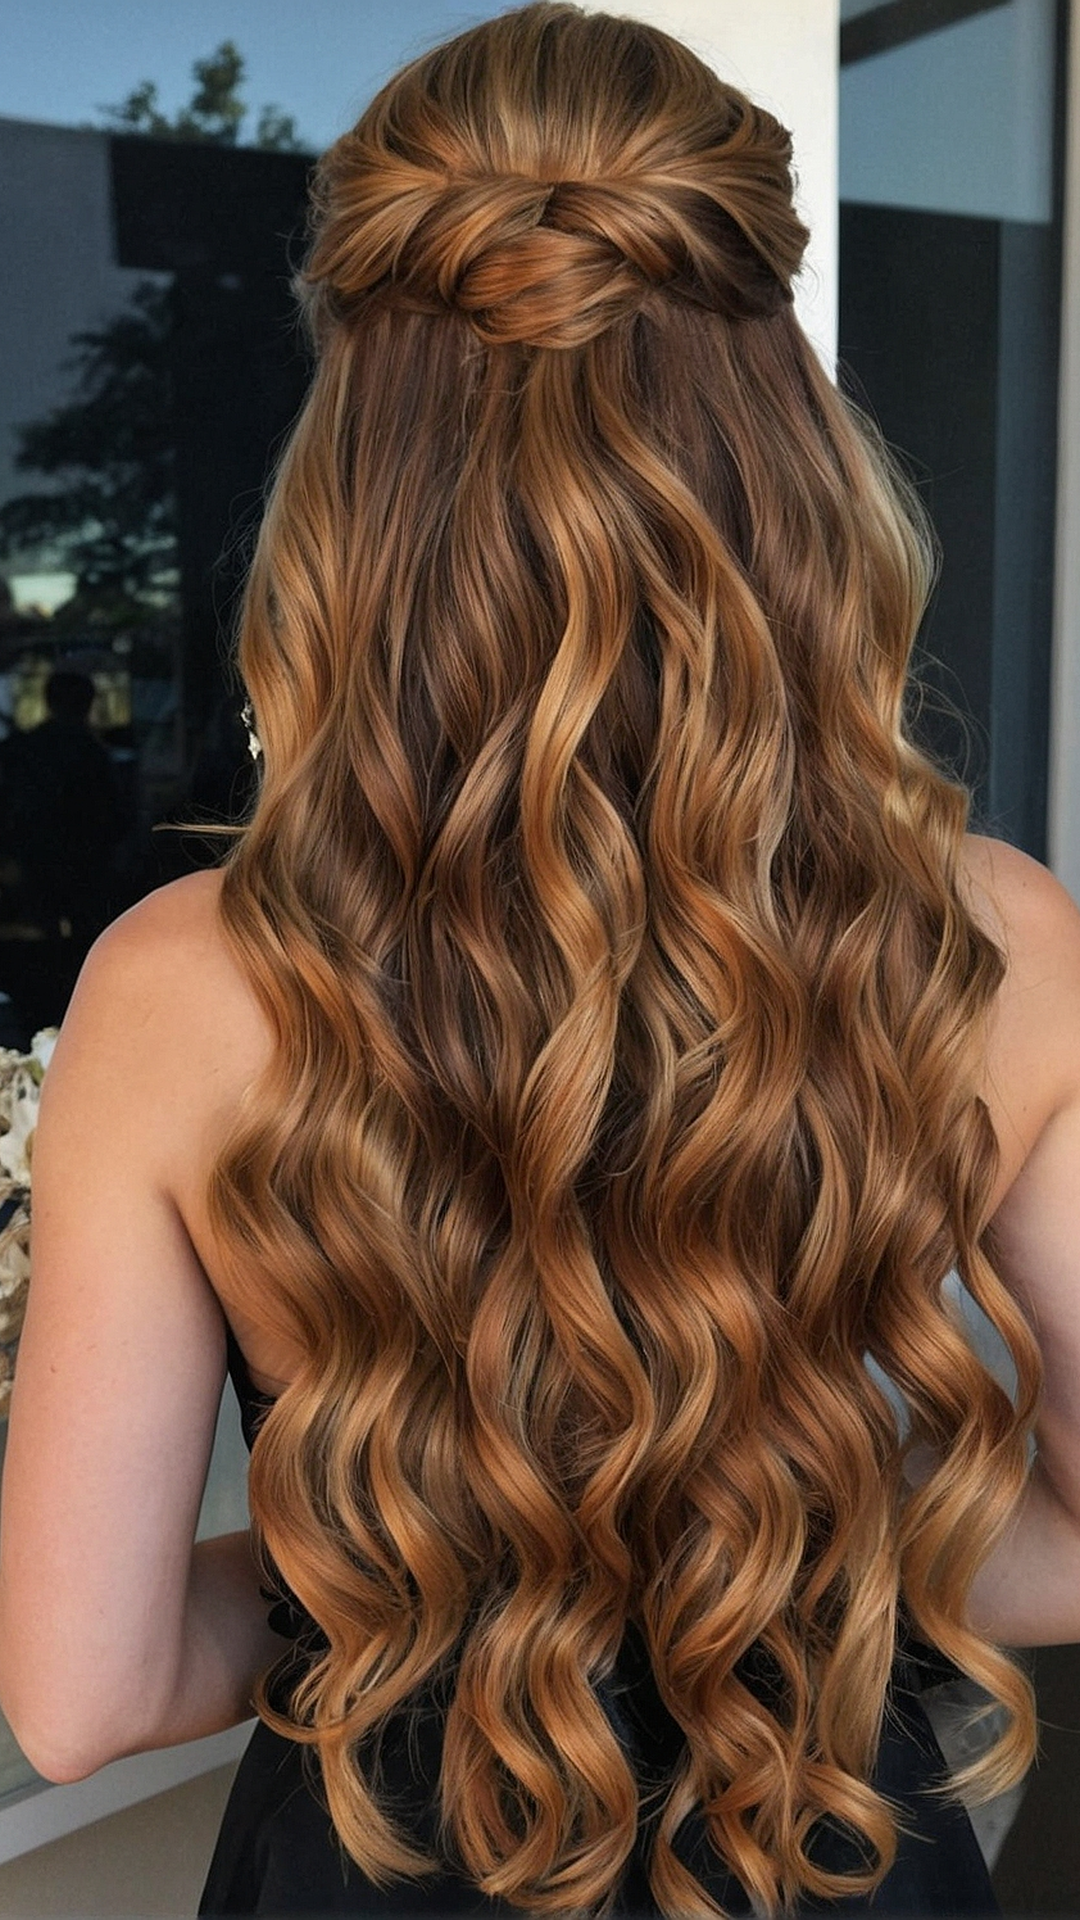 Chic Side Swept Styles for Prom Night